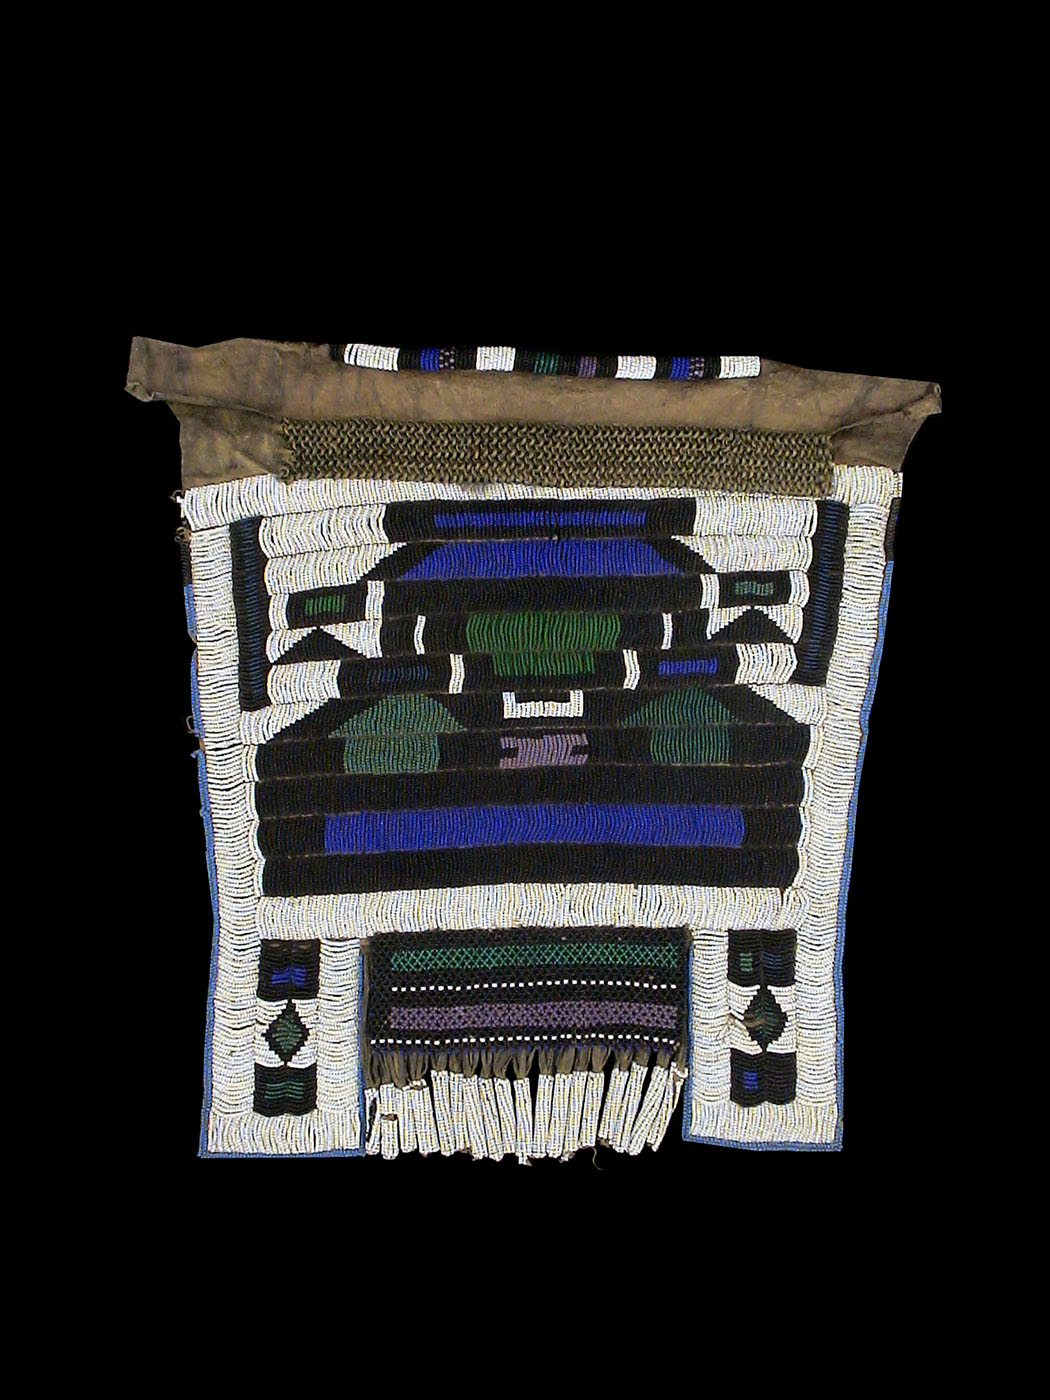  Mapoto Beaded Skirt - Ndebele People, South Africa  - 3401